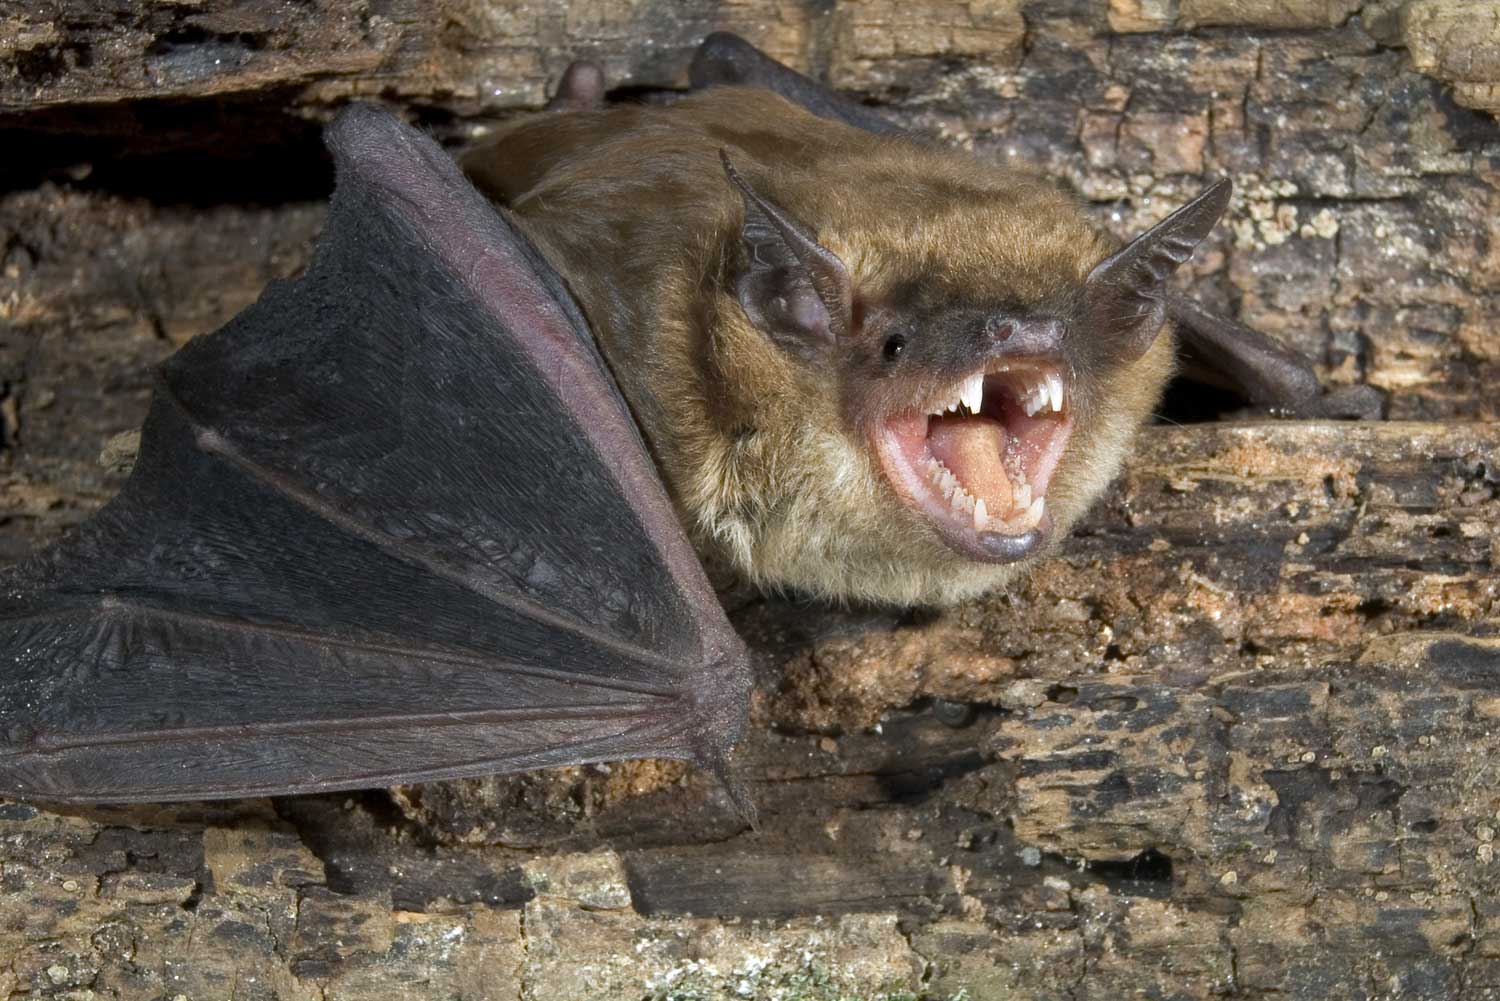 A bat hanging upside down with its mouth open.